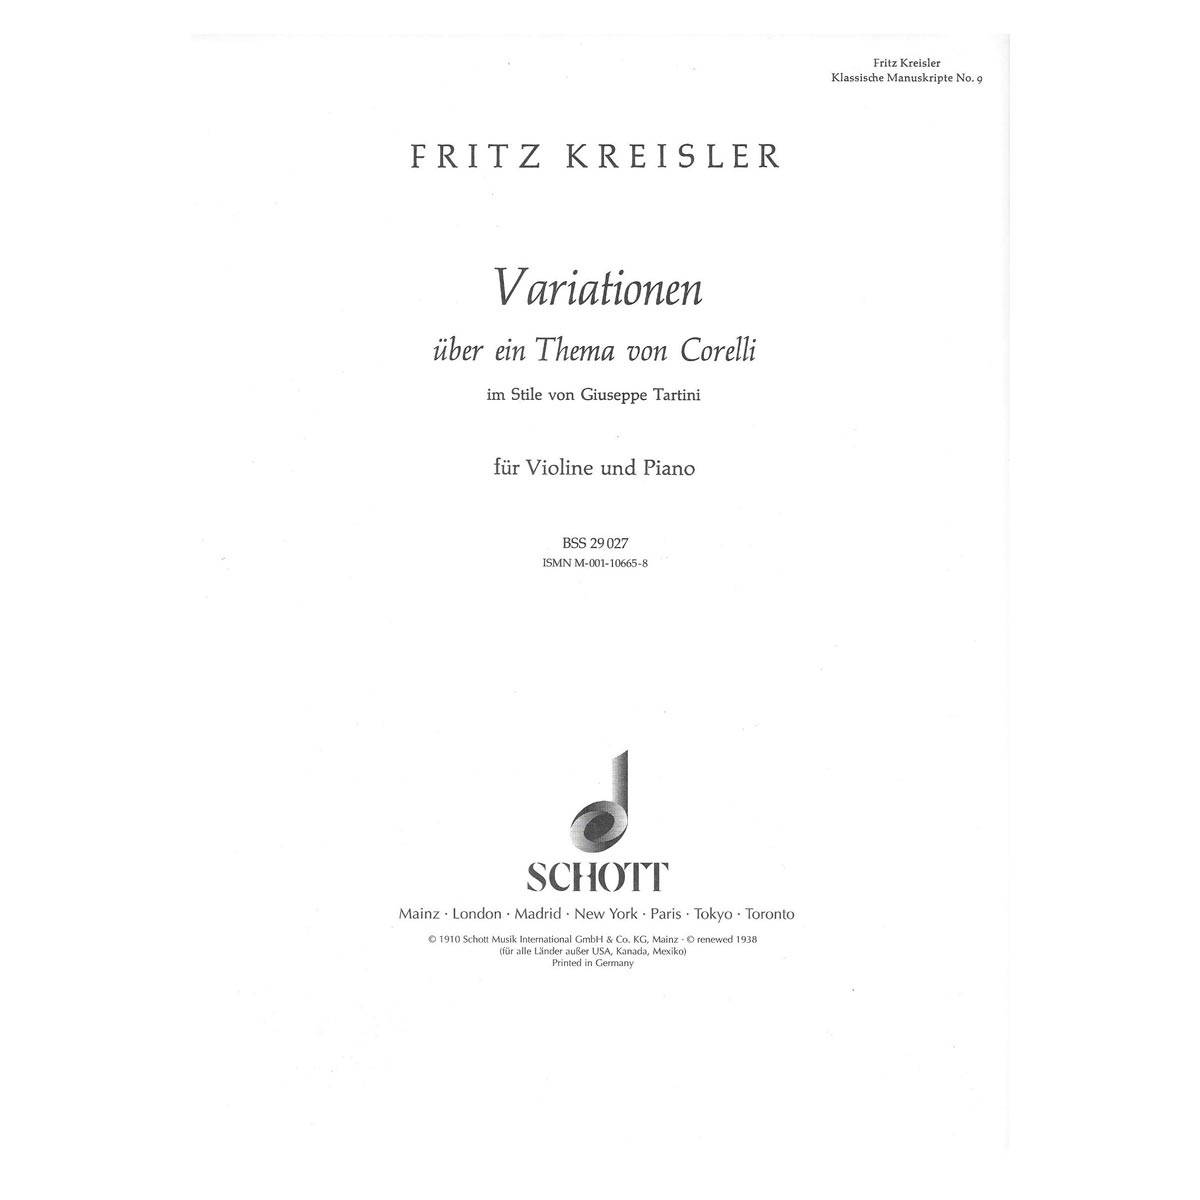 Kreisler - Variations On A Theme by Corelli in F Major